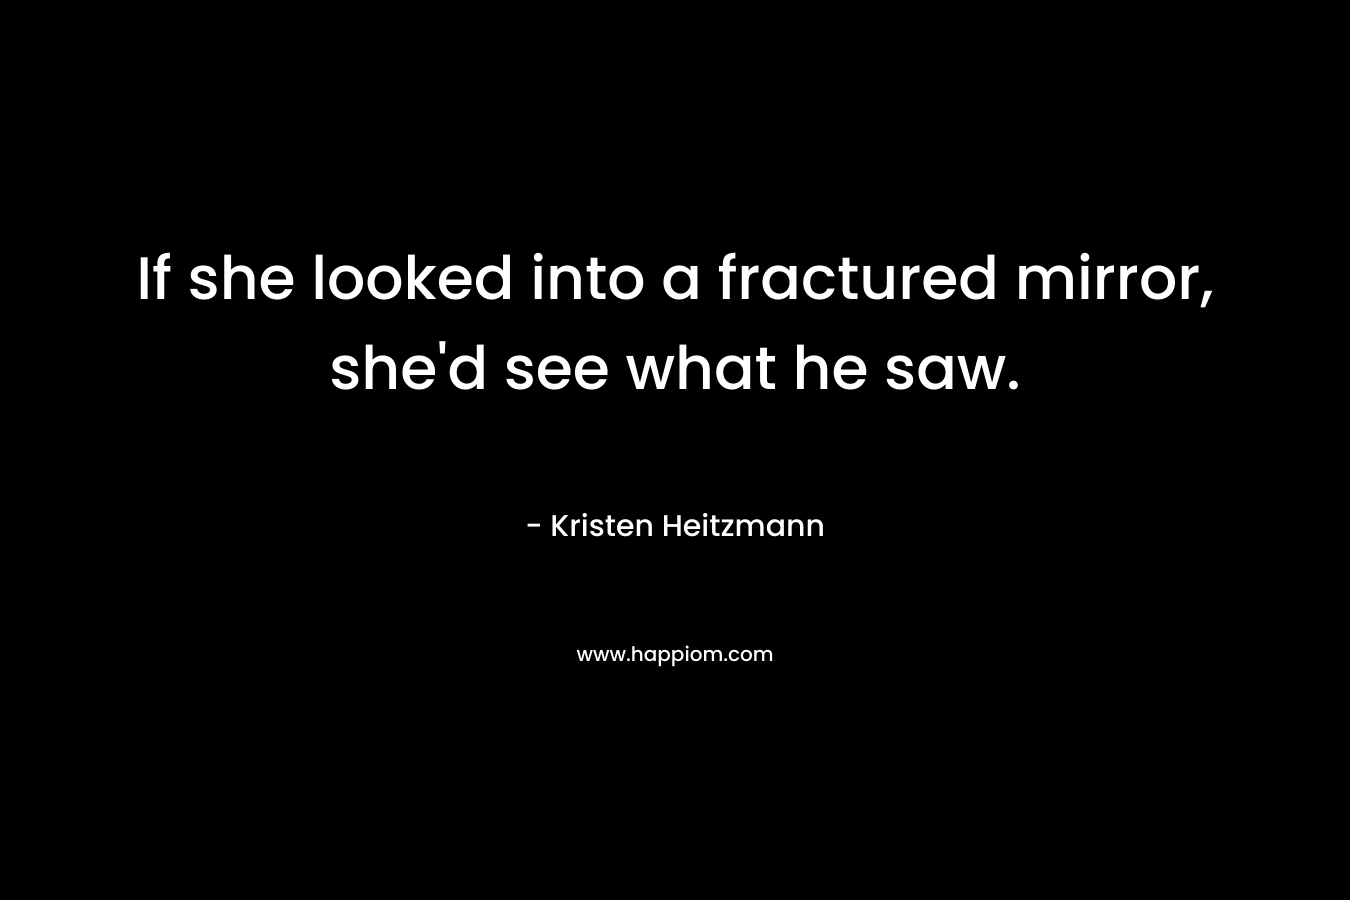 If she looked into a fractured mirror, she'd see what he saw.